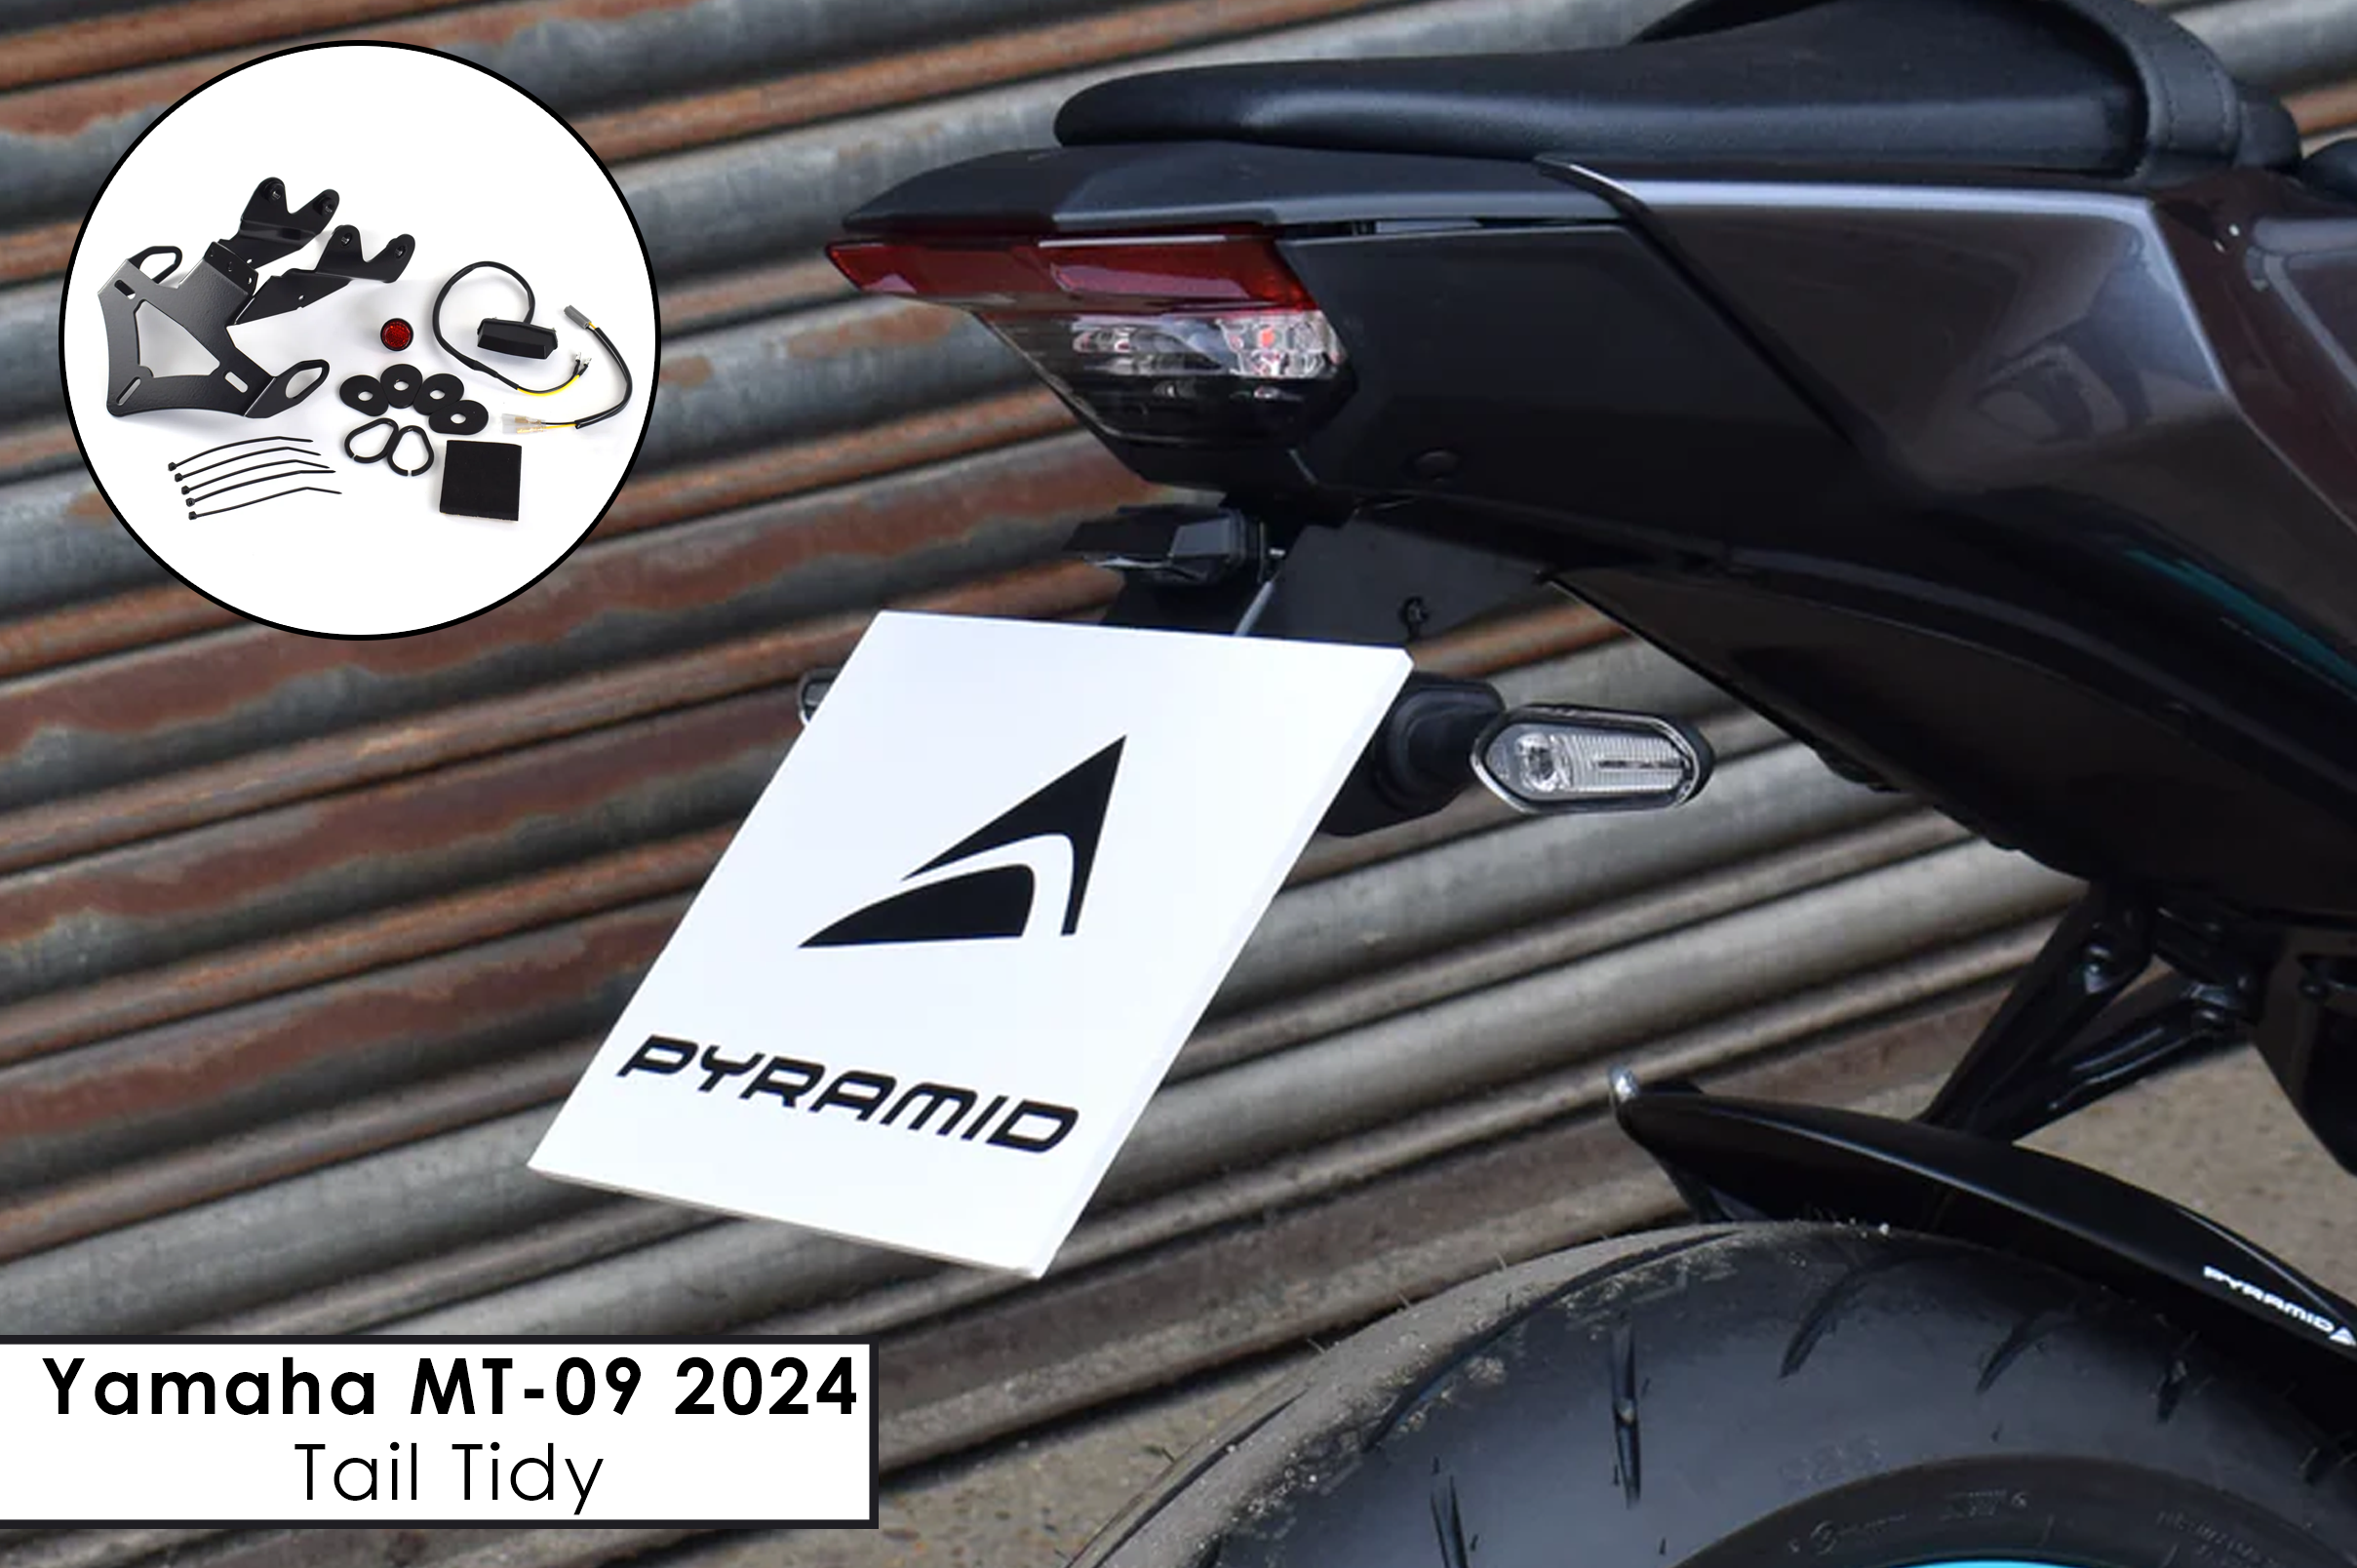 Tail Tidy For The 2024 Yamaha MT-09 'Gen 4'